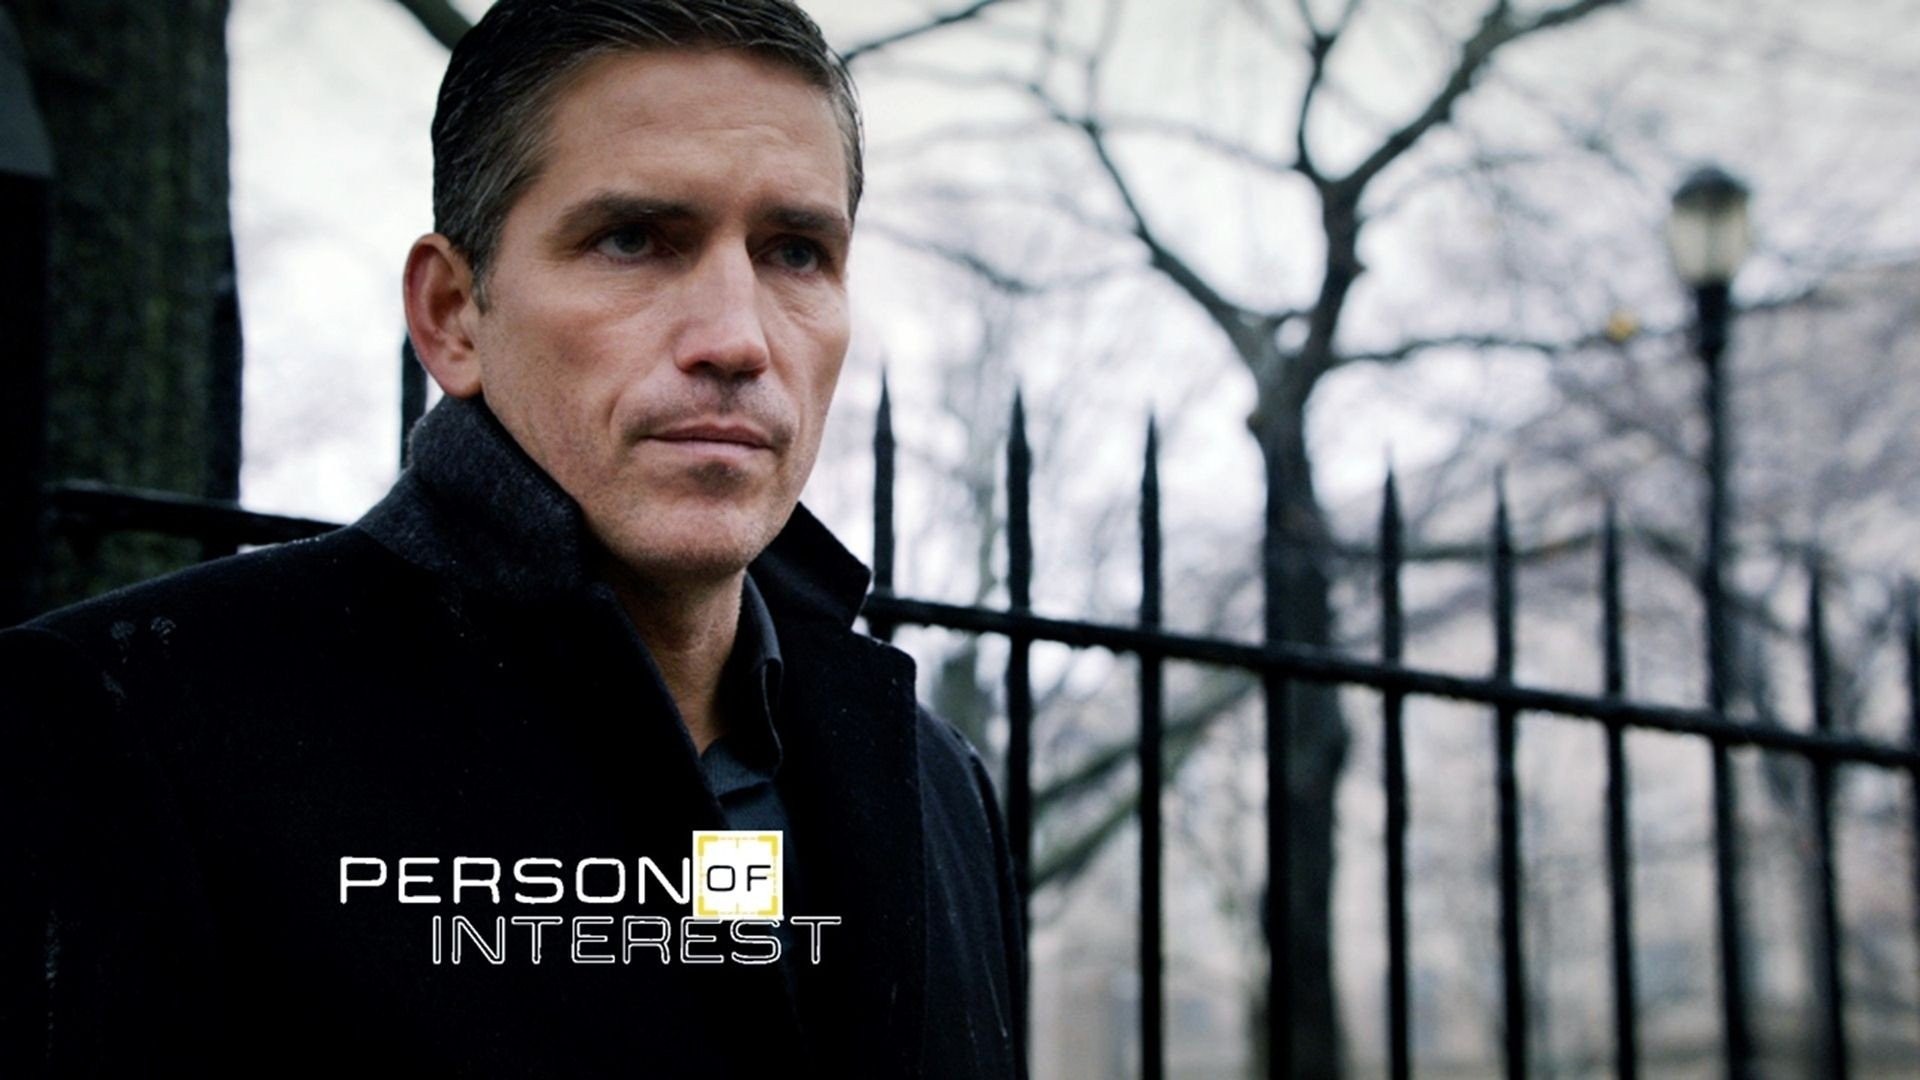 1920x1080 PERSON OF INTEREST action drama mystery series crime wallpaper |   | 476716 | WallpaperUP